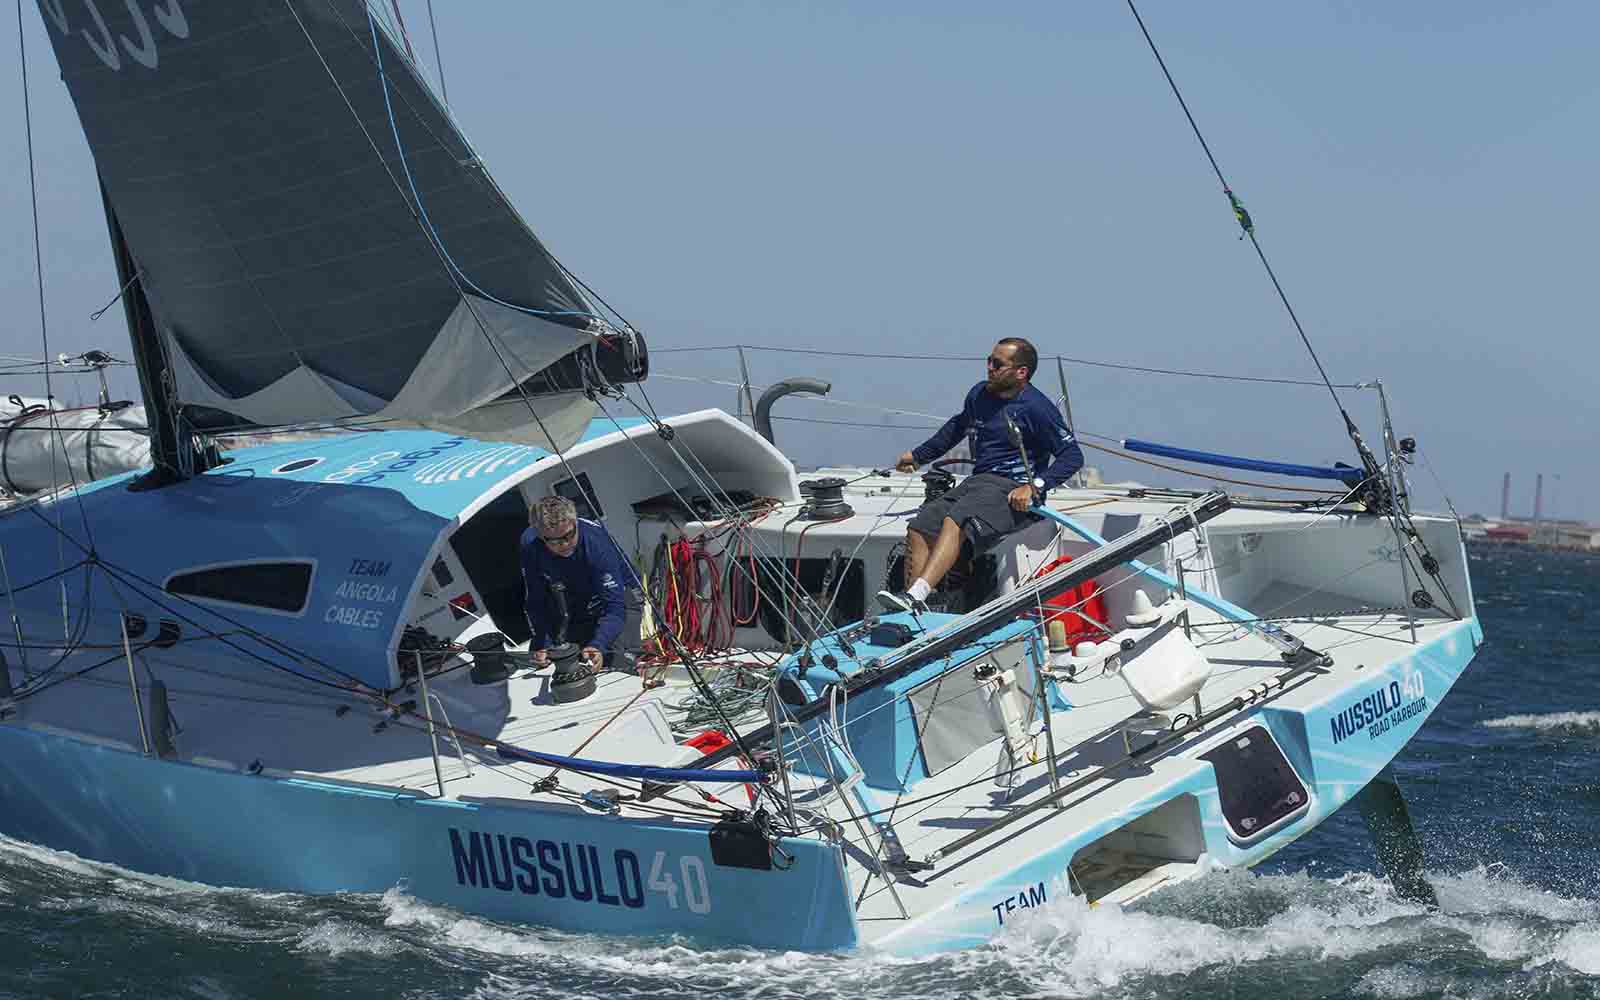 team angola cables mussulo 40 caribbean 600 - boat shopping